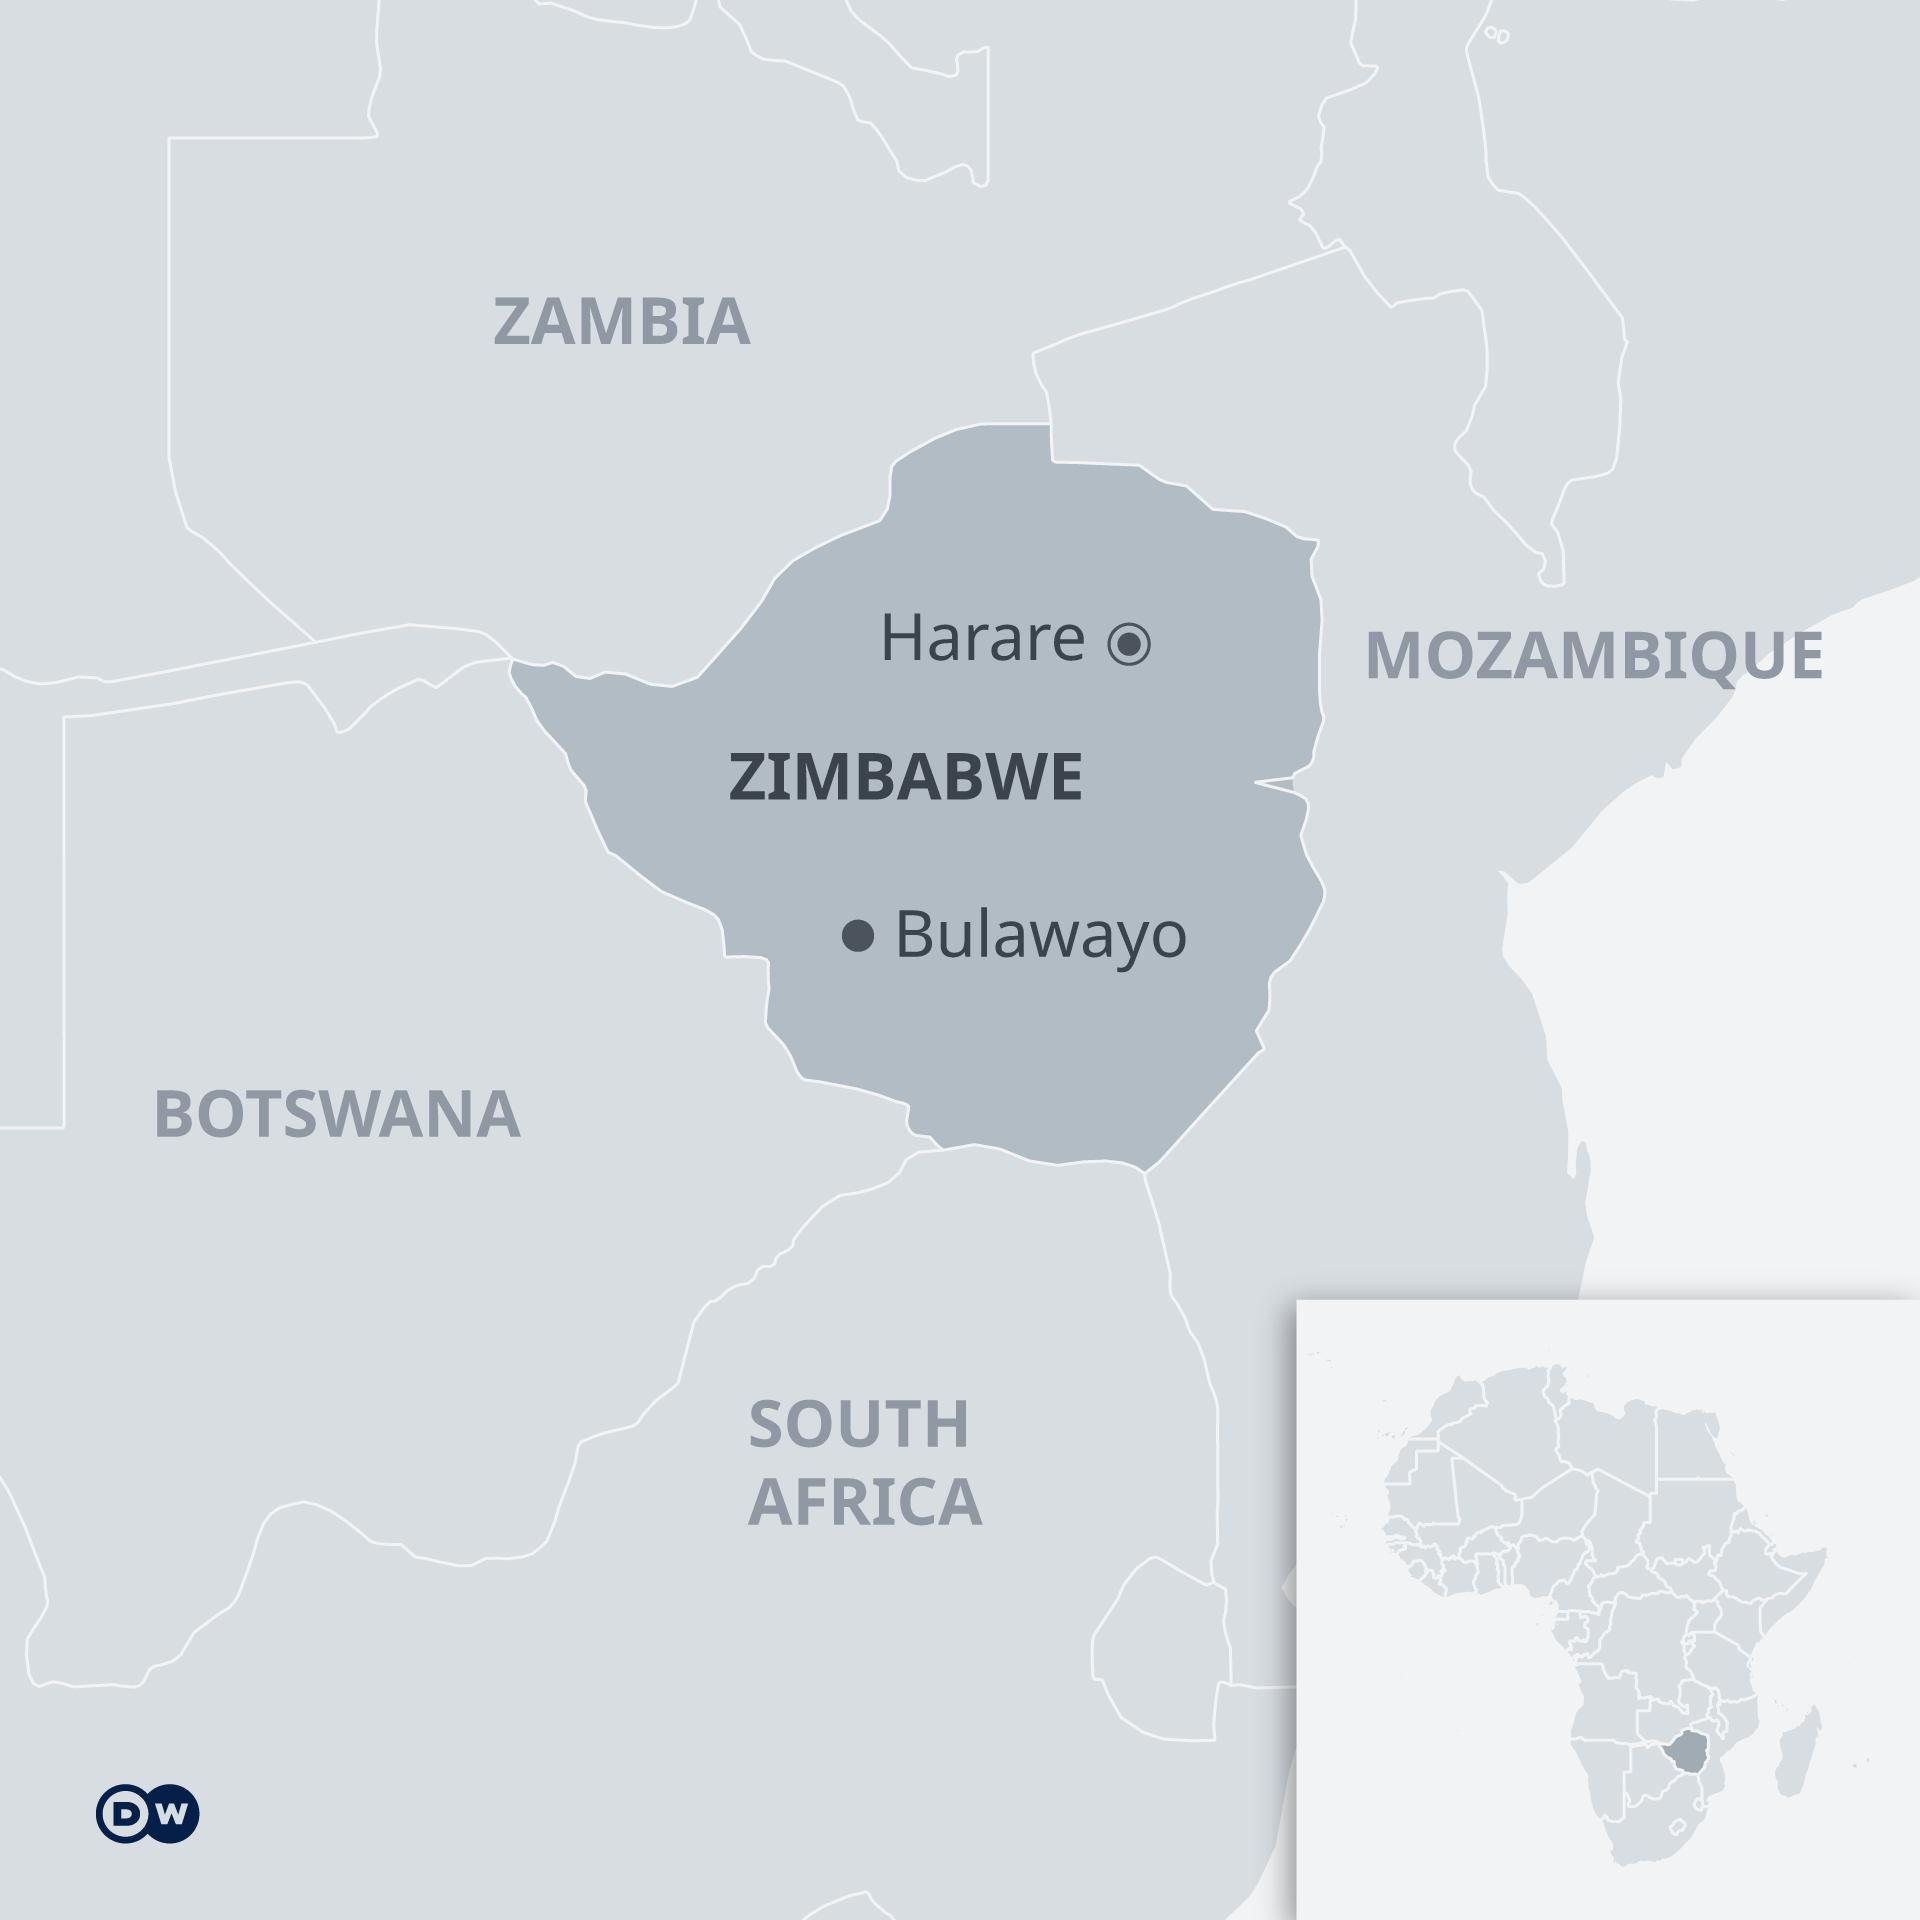 A map of Zimbabwe and surrounding countries